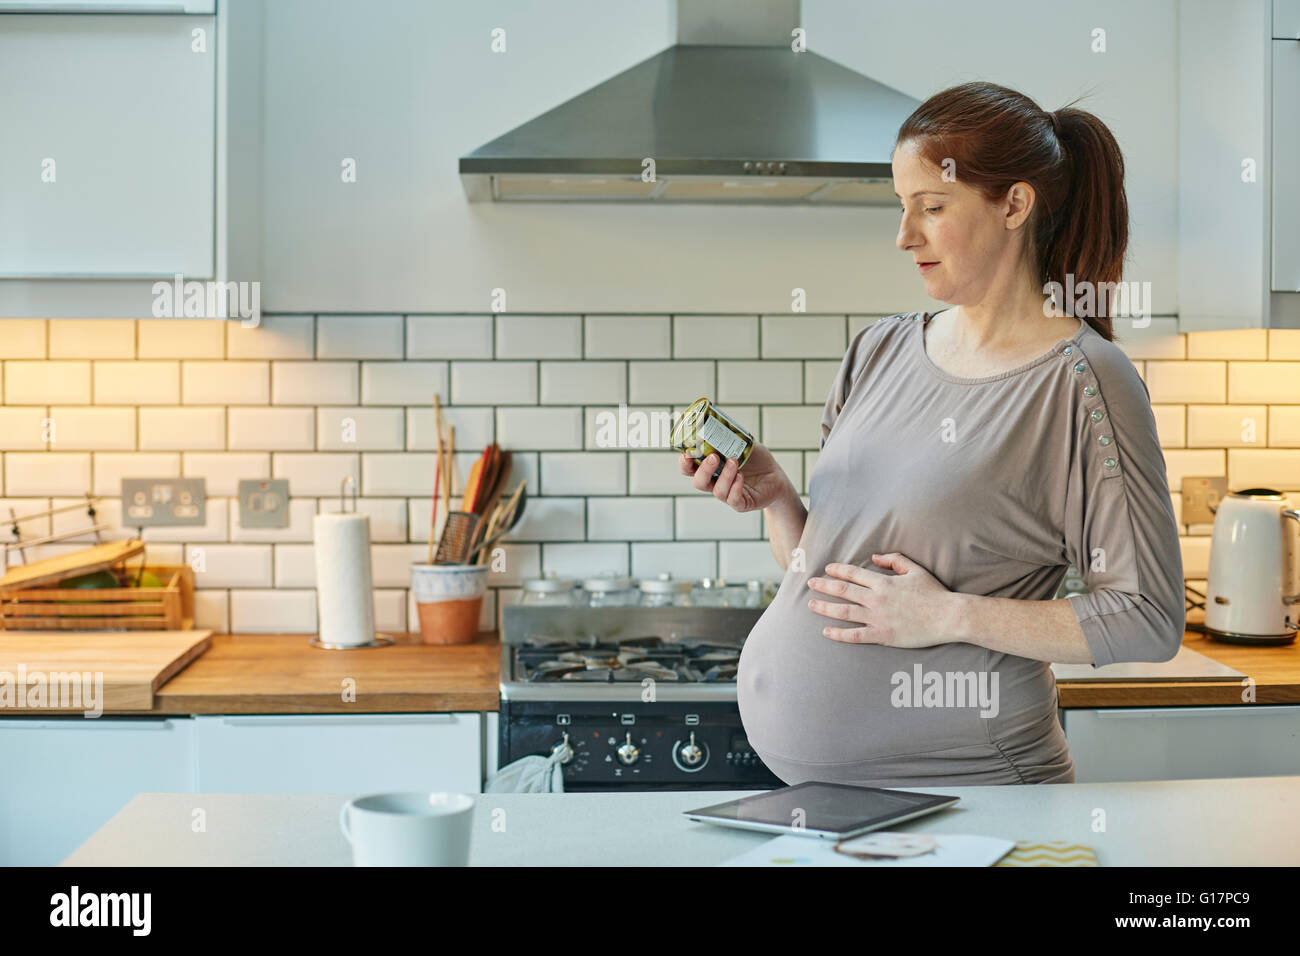 Side view of pregnant woman in kitchen looking at food packaging Stock Photo